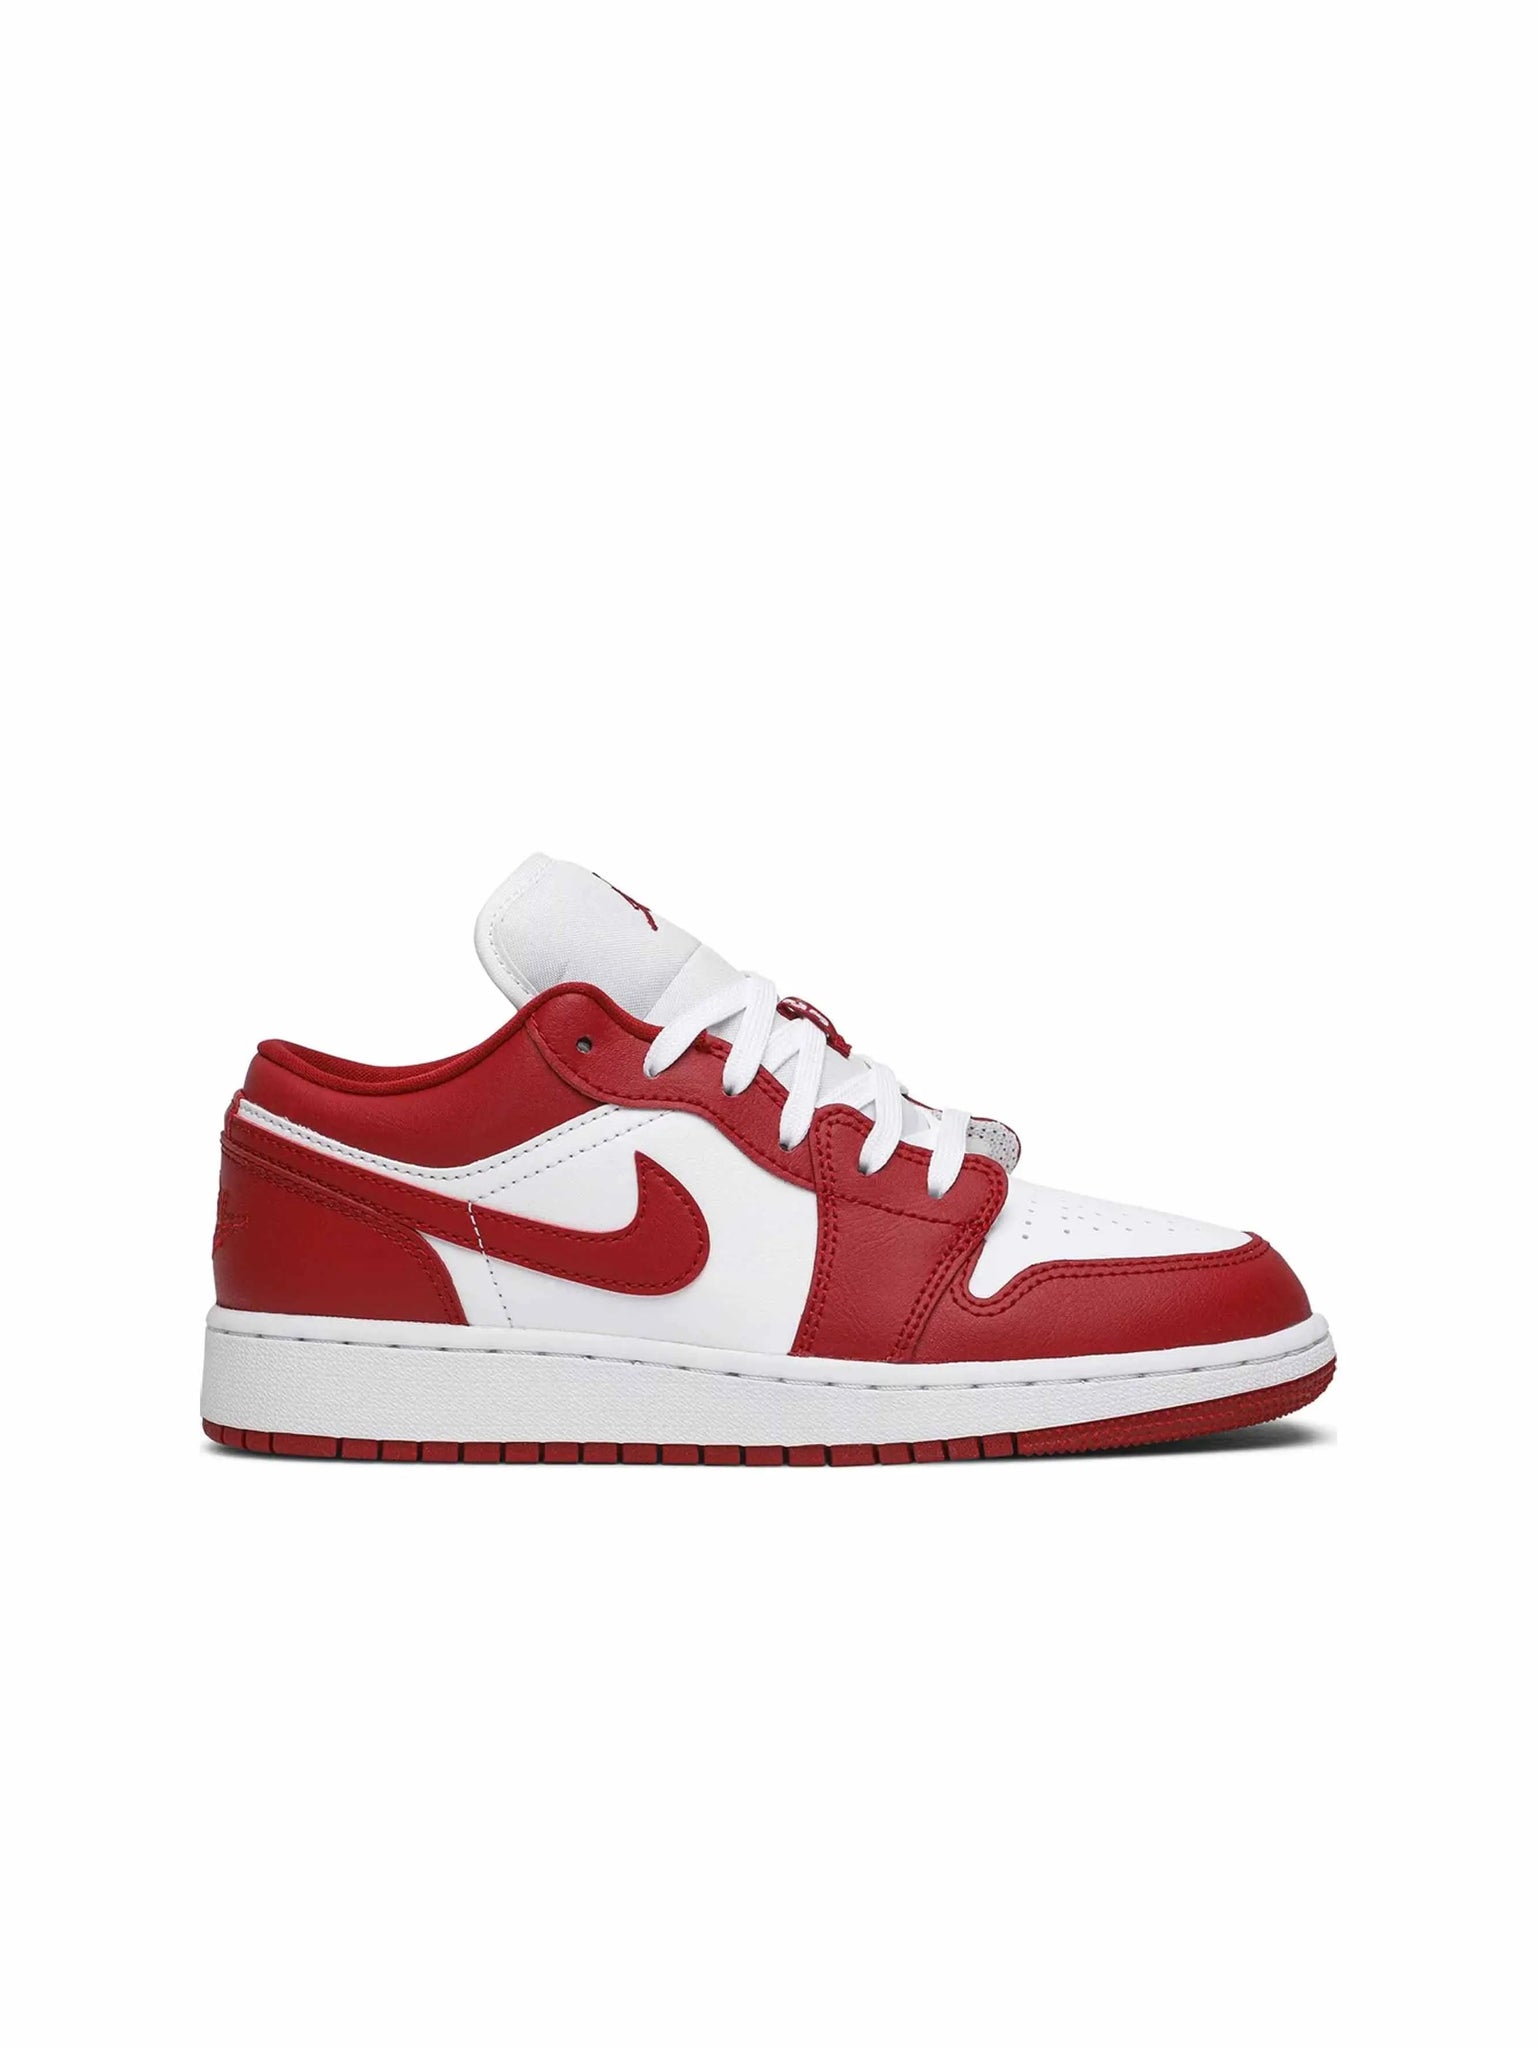 Nike Air Jordan 1 Low Gym Red White (GS) in Auckland, New Zealand - Shop name